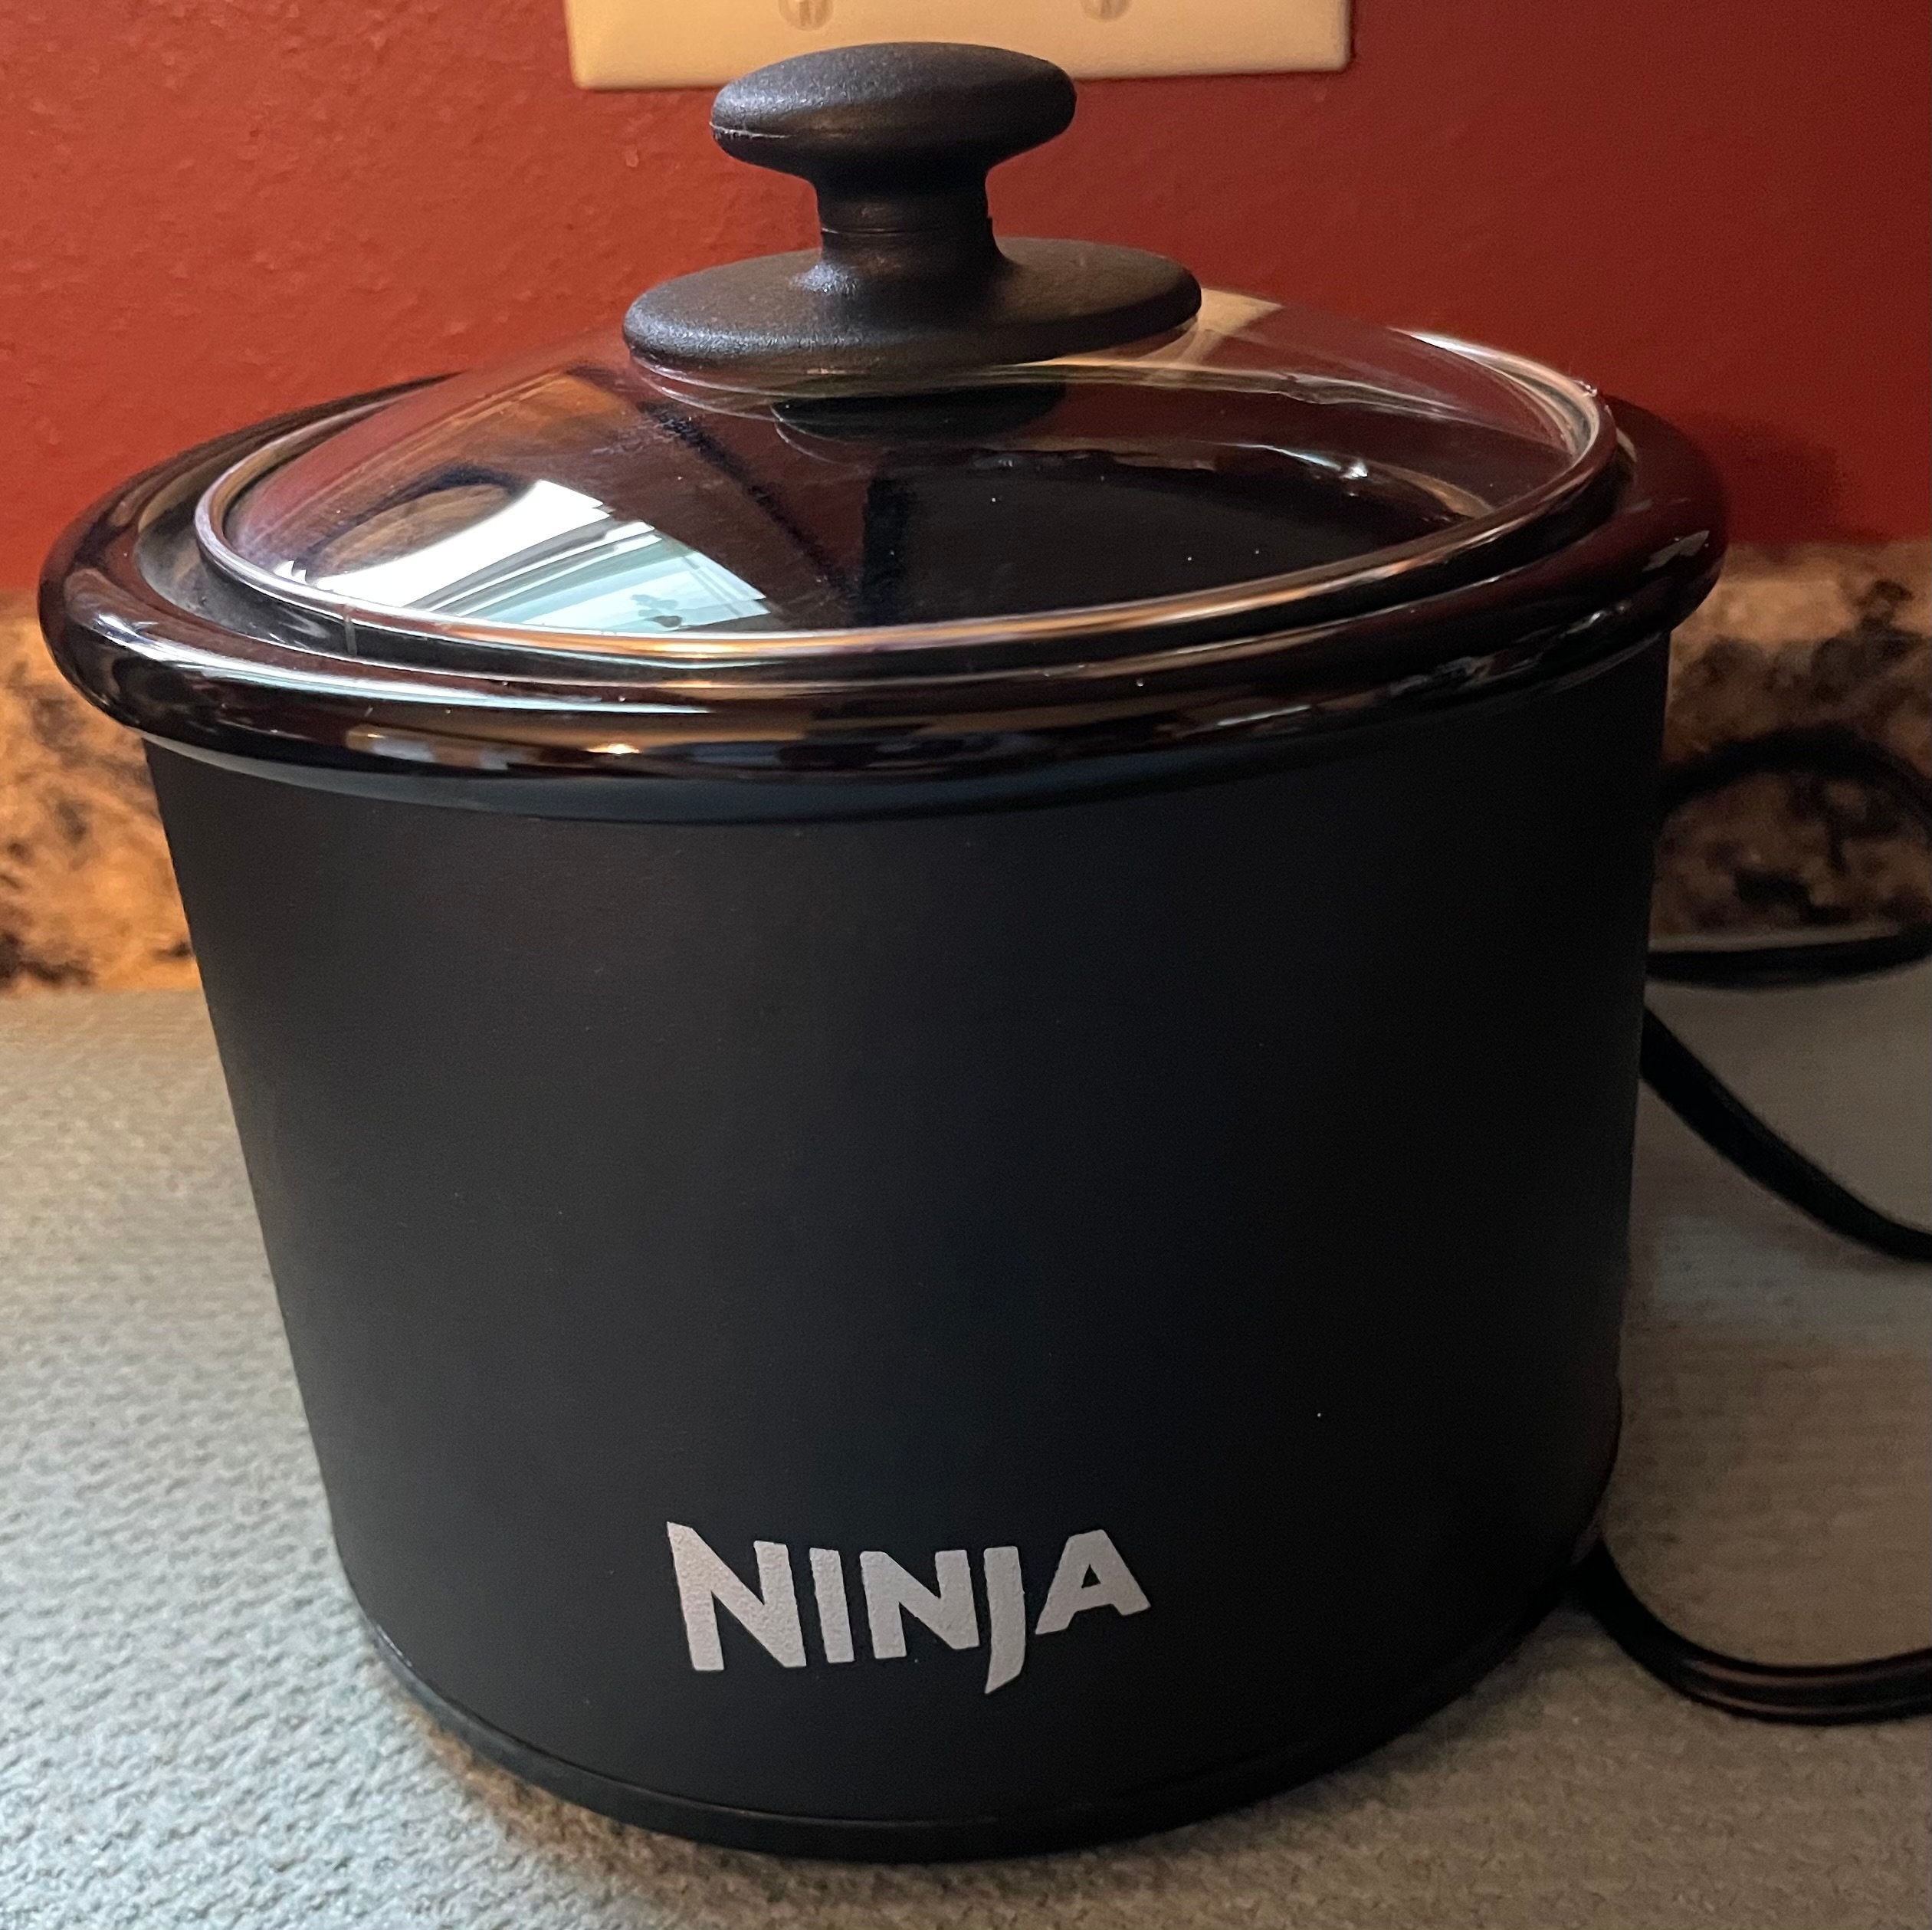 Lunch Crock 20oz Portable Food Warmer From Crock Pot -Soup chili